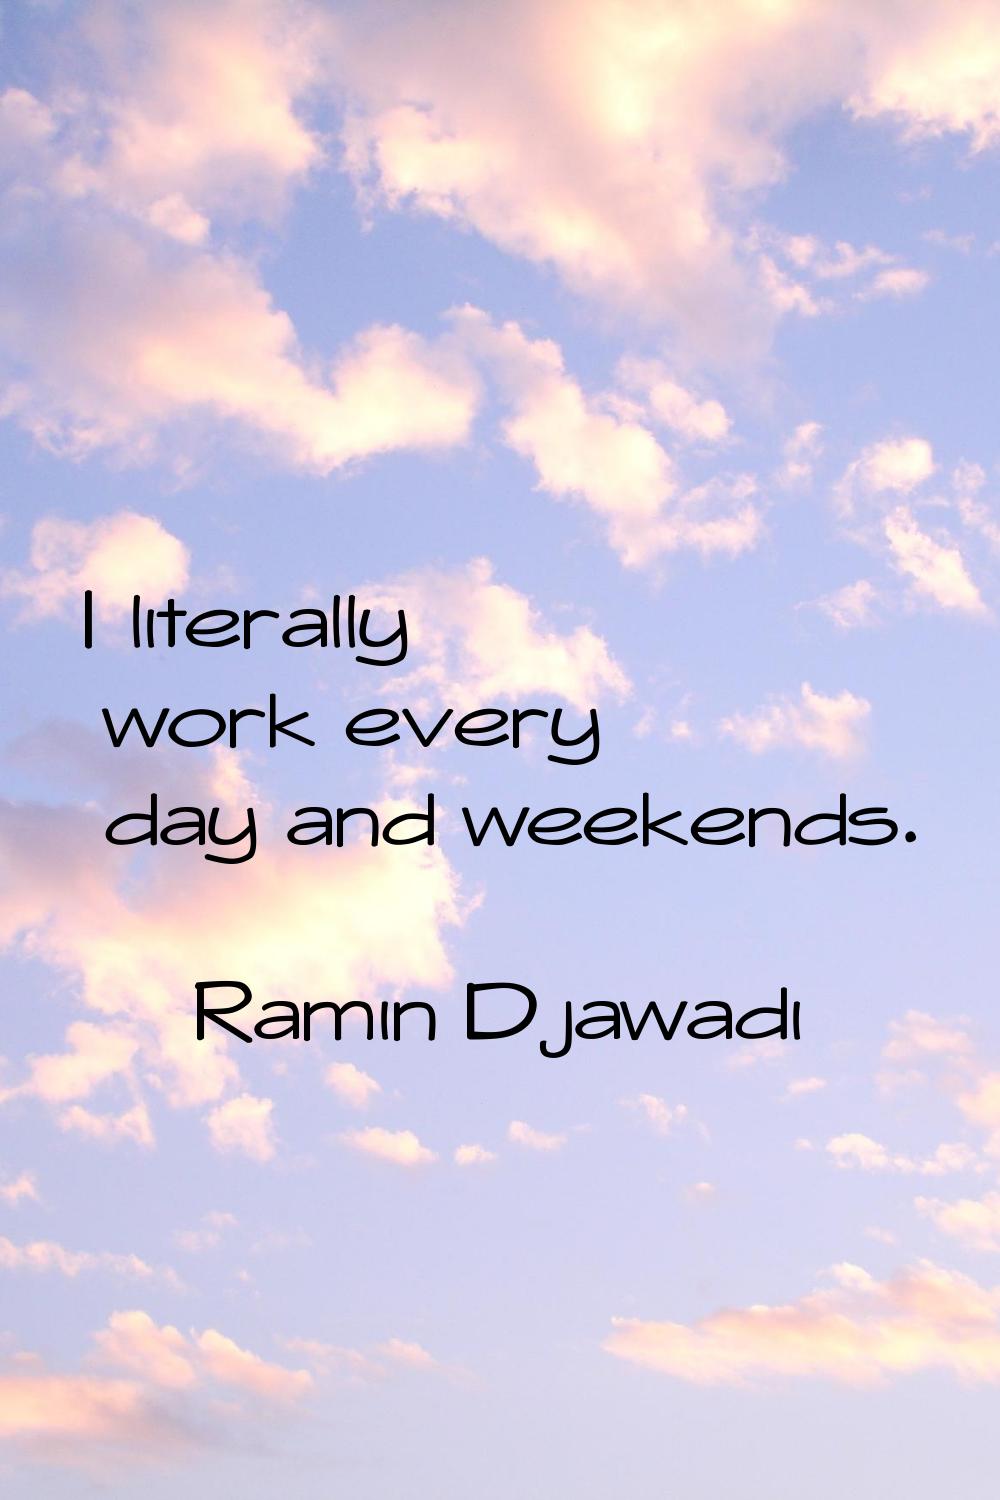 I literally work every day and weekends.